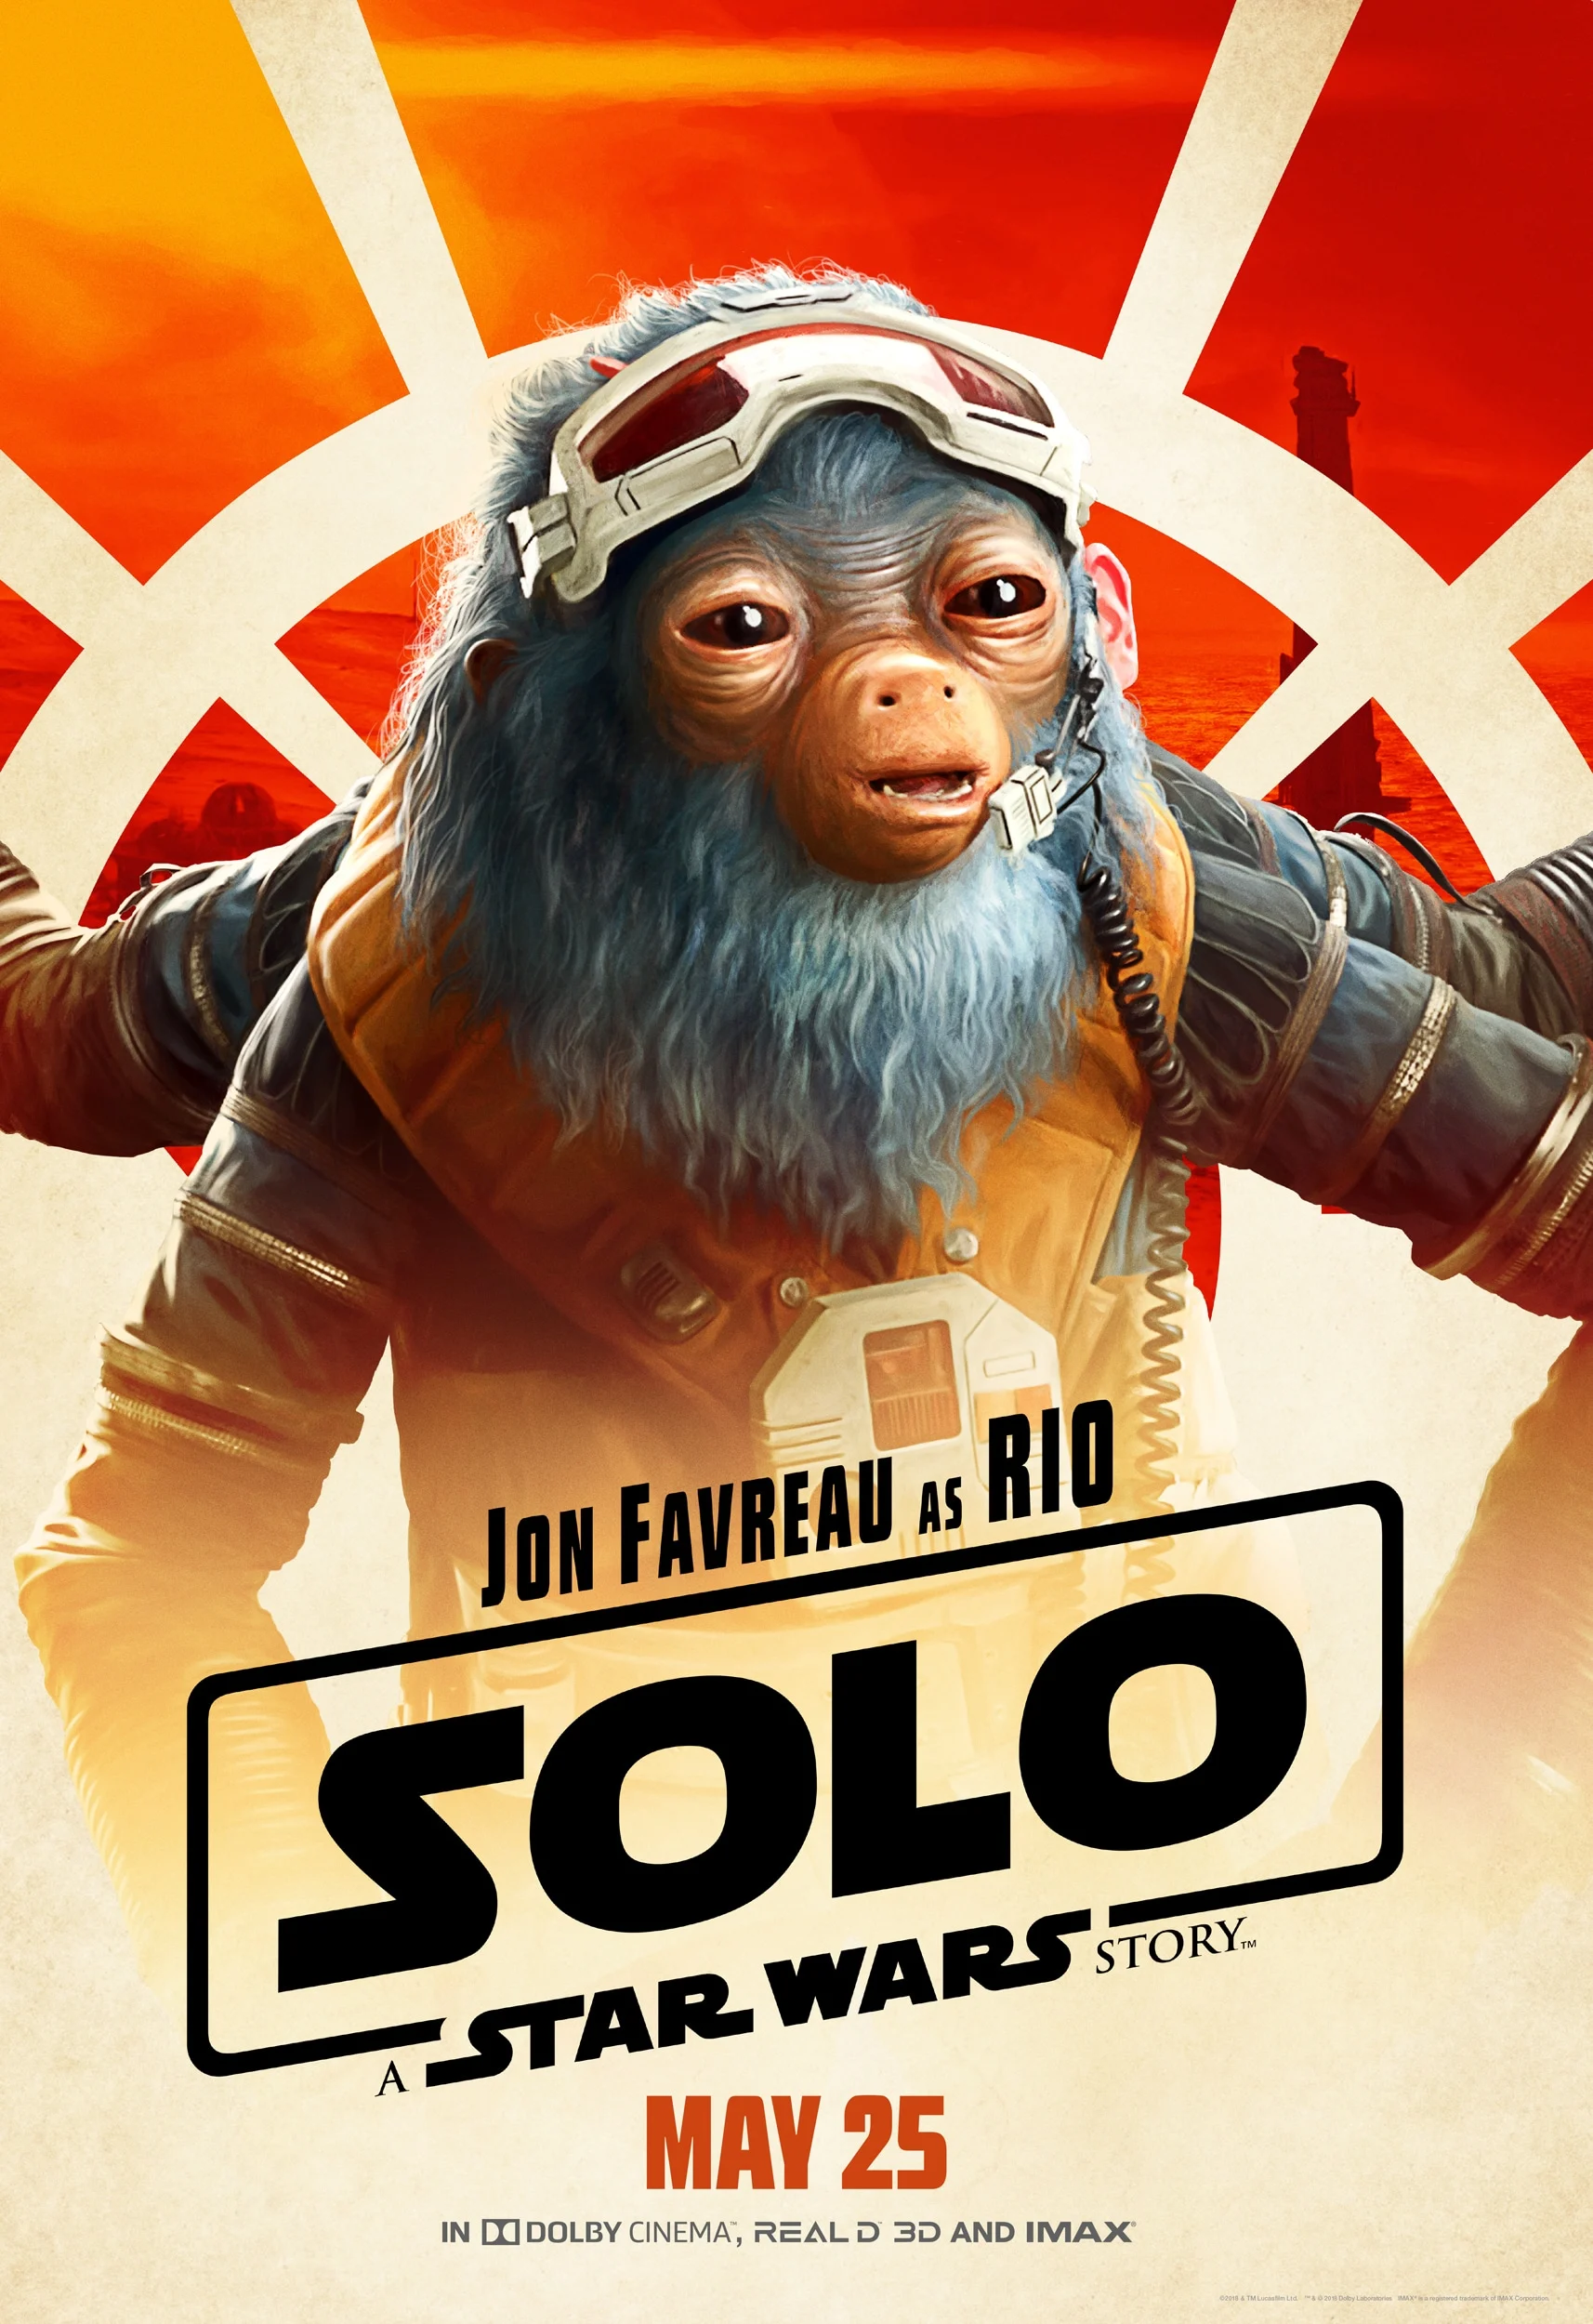 SOLO: A STAR WARS STORY Free Coloring Pages + Activity Sheets! #HanSoloEvent #HanSolo